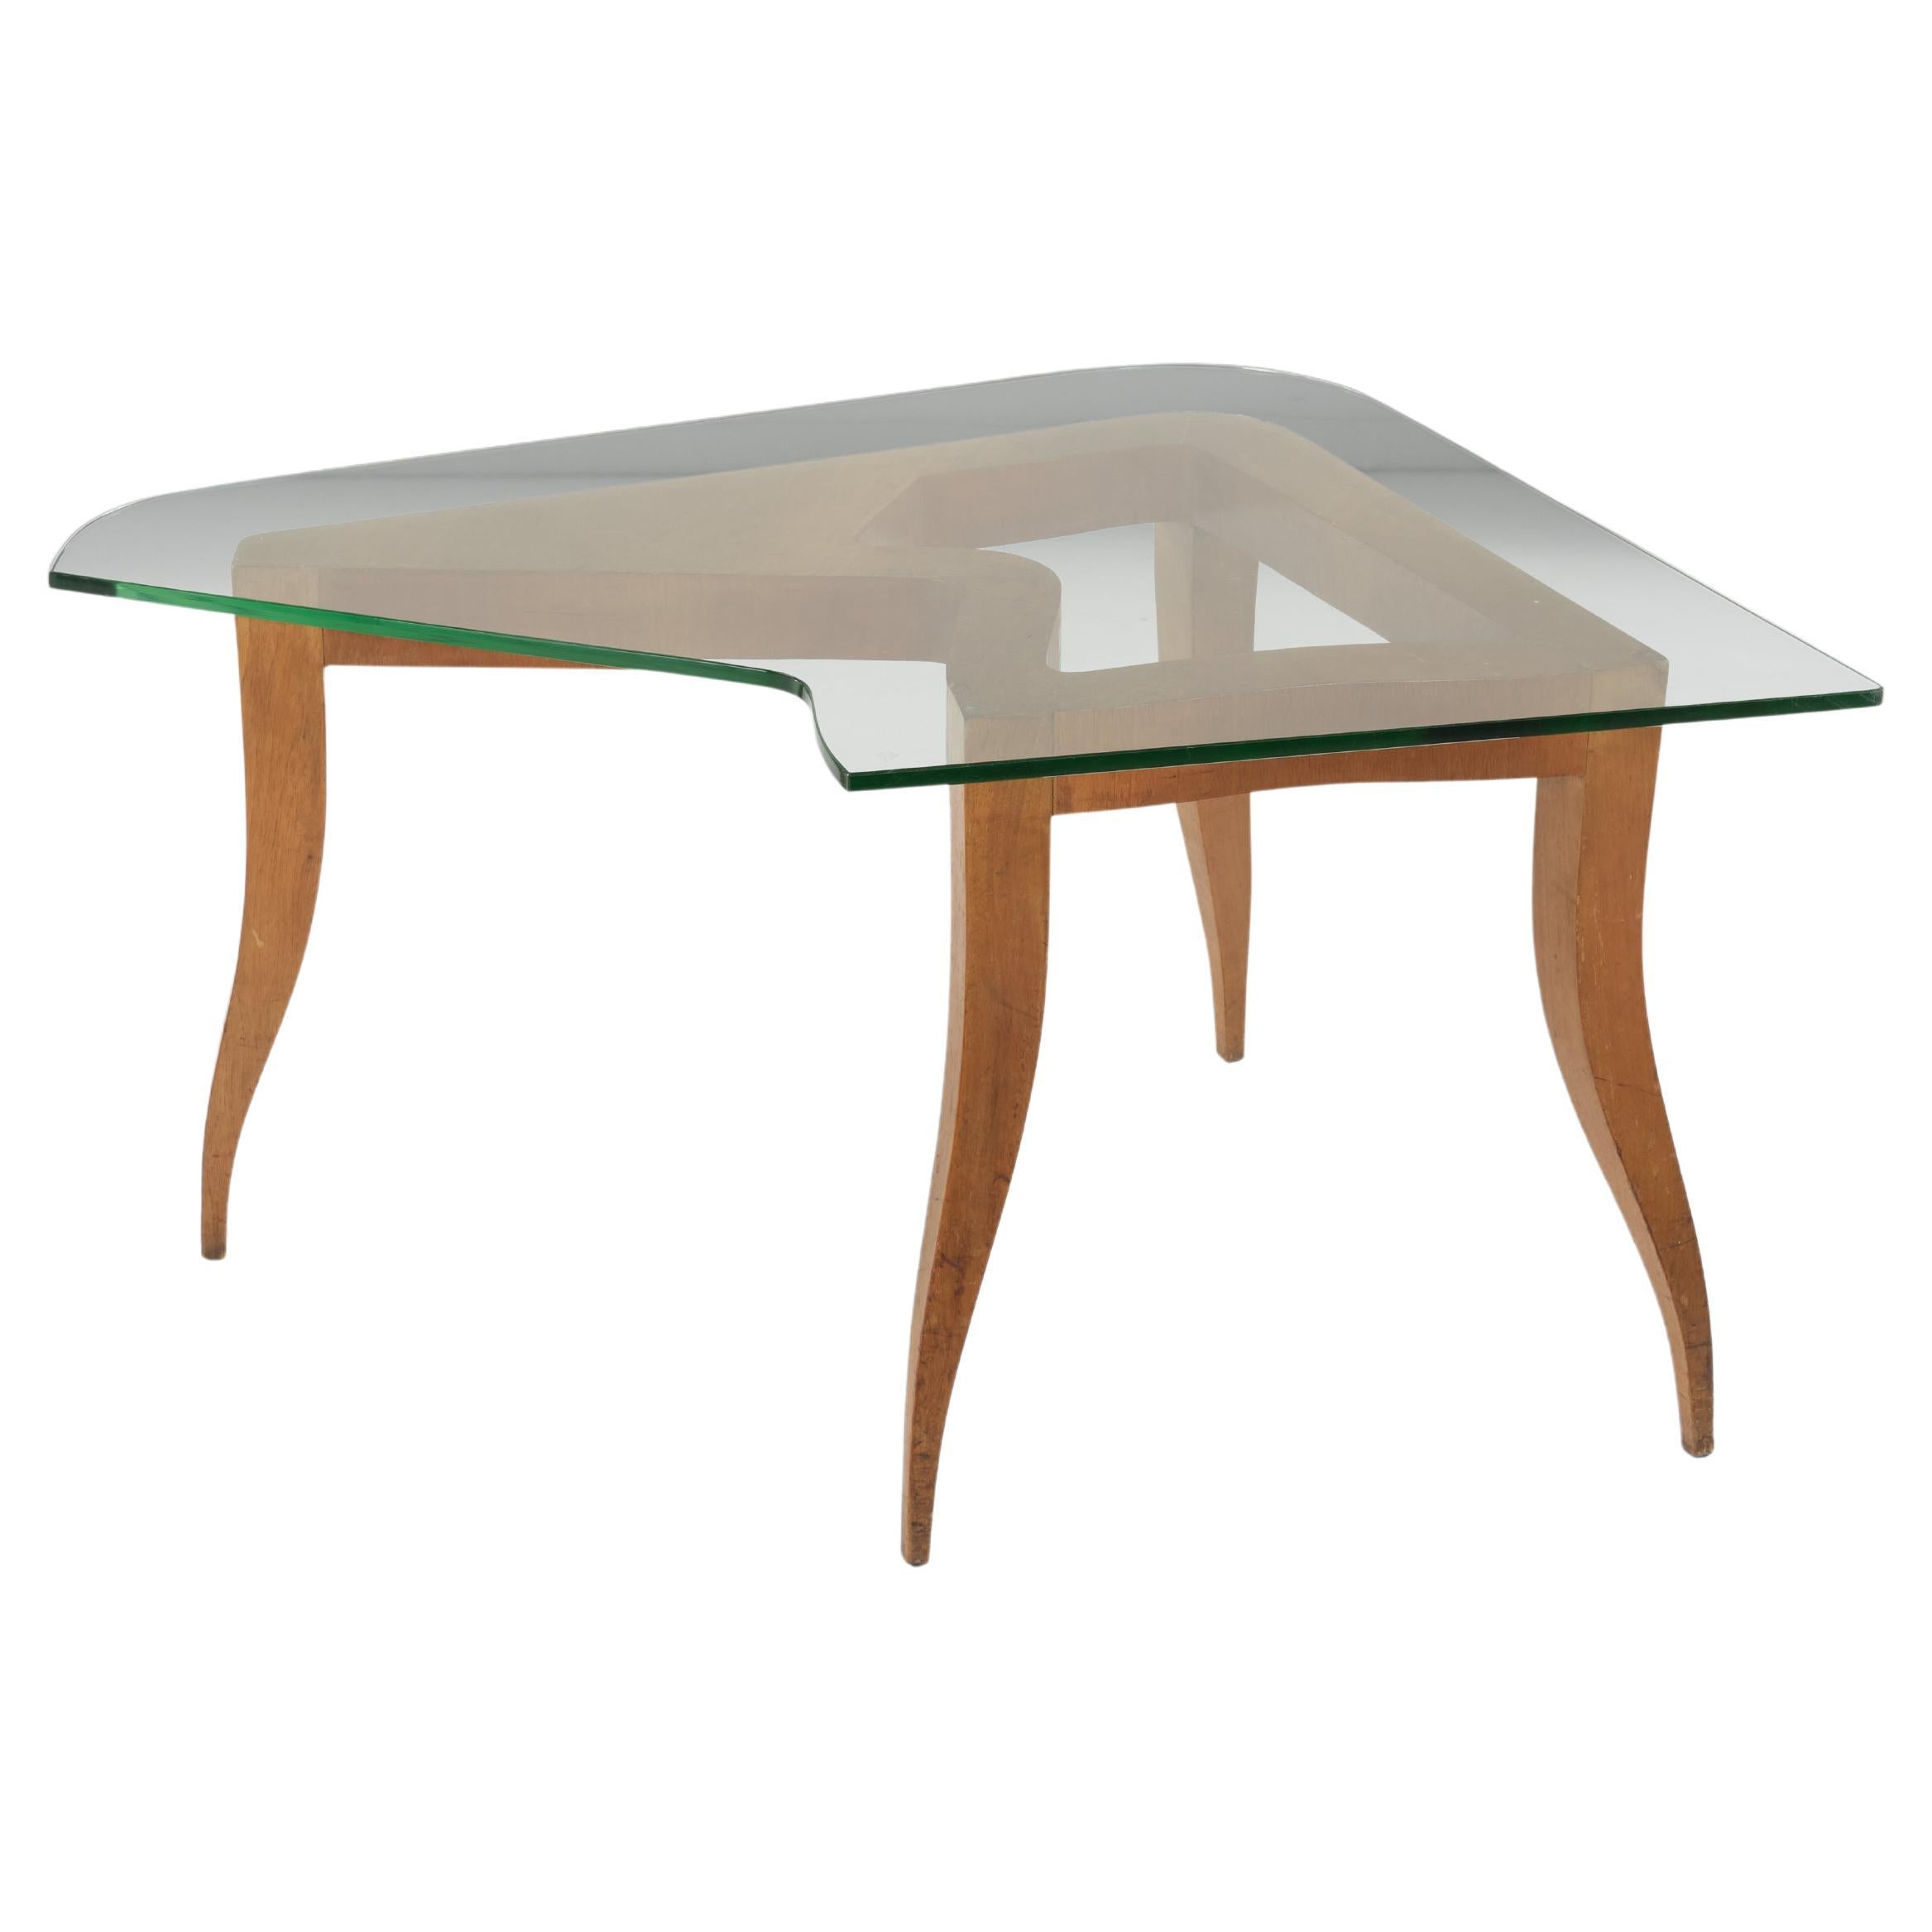 Melchiorre Bega Coffe Table in Glass and Wood 1940 Ca.